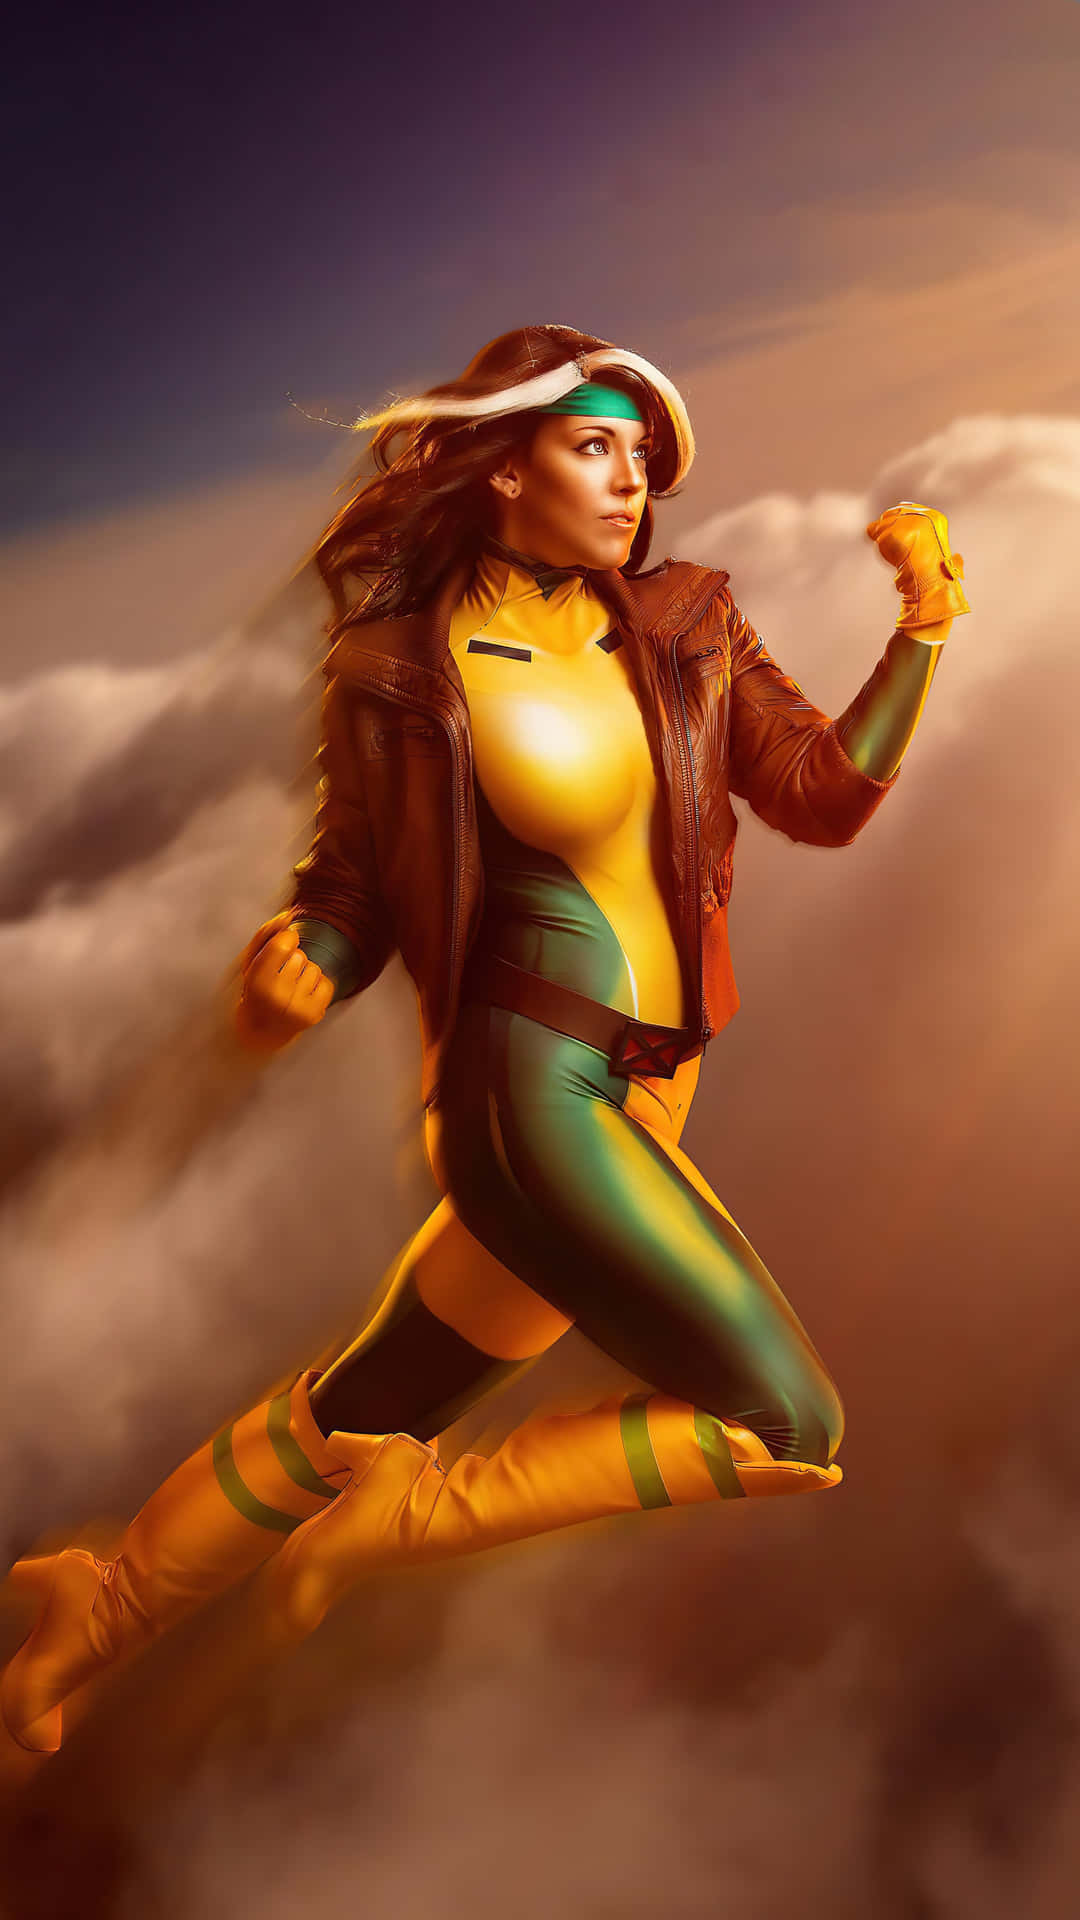 A Woman In A Yellow And Green Costume Flying Through The Clouds Wallpaper